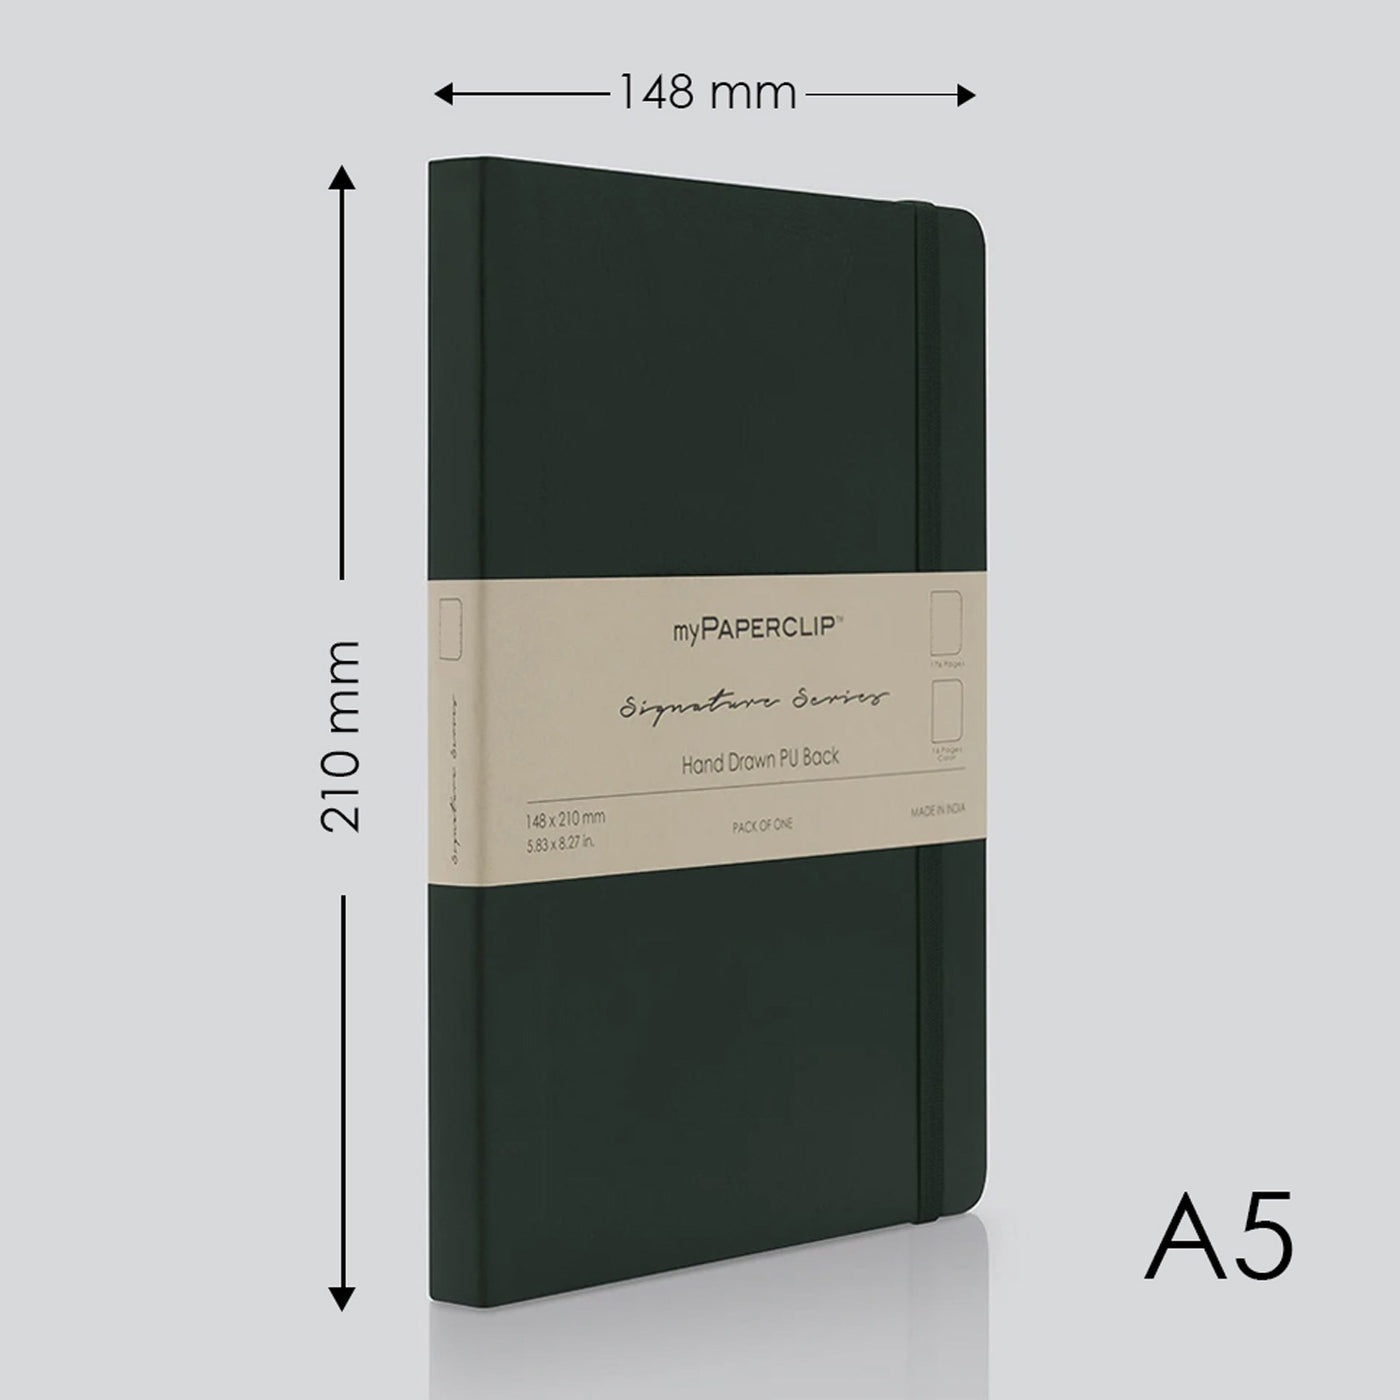 myPAPERCLIP Signature Series Soft Cover Notebook - Green - A5 - Plain